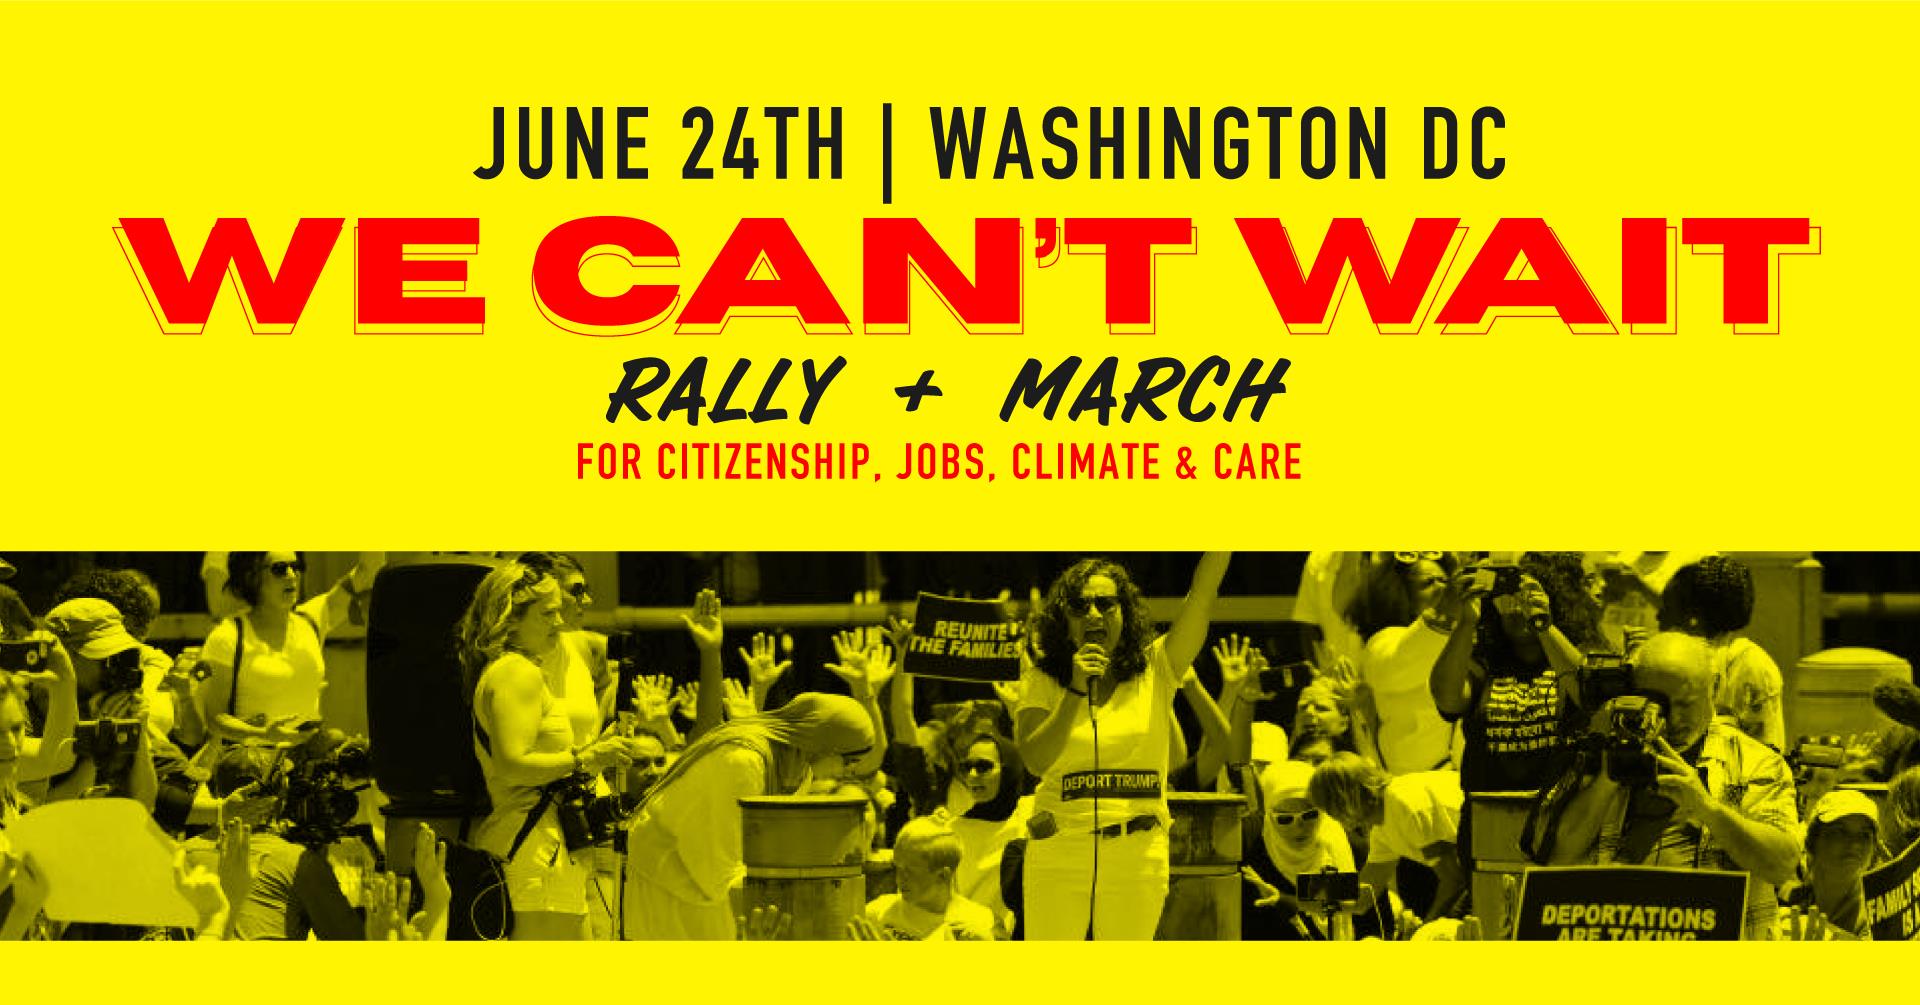 Join the #WeCantWait action on June 24